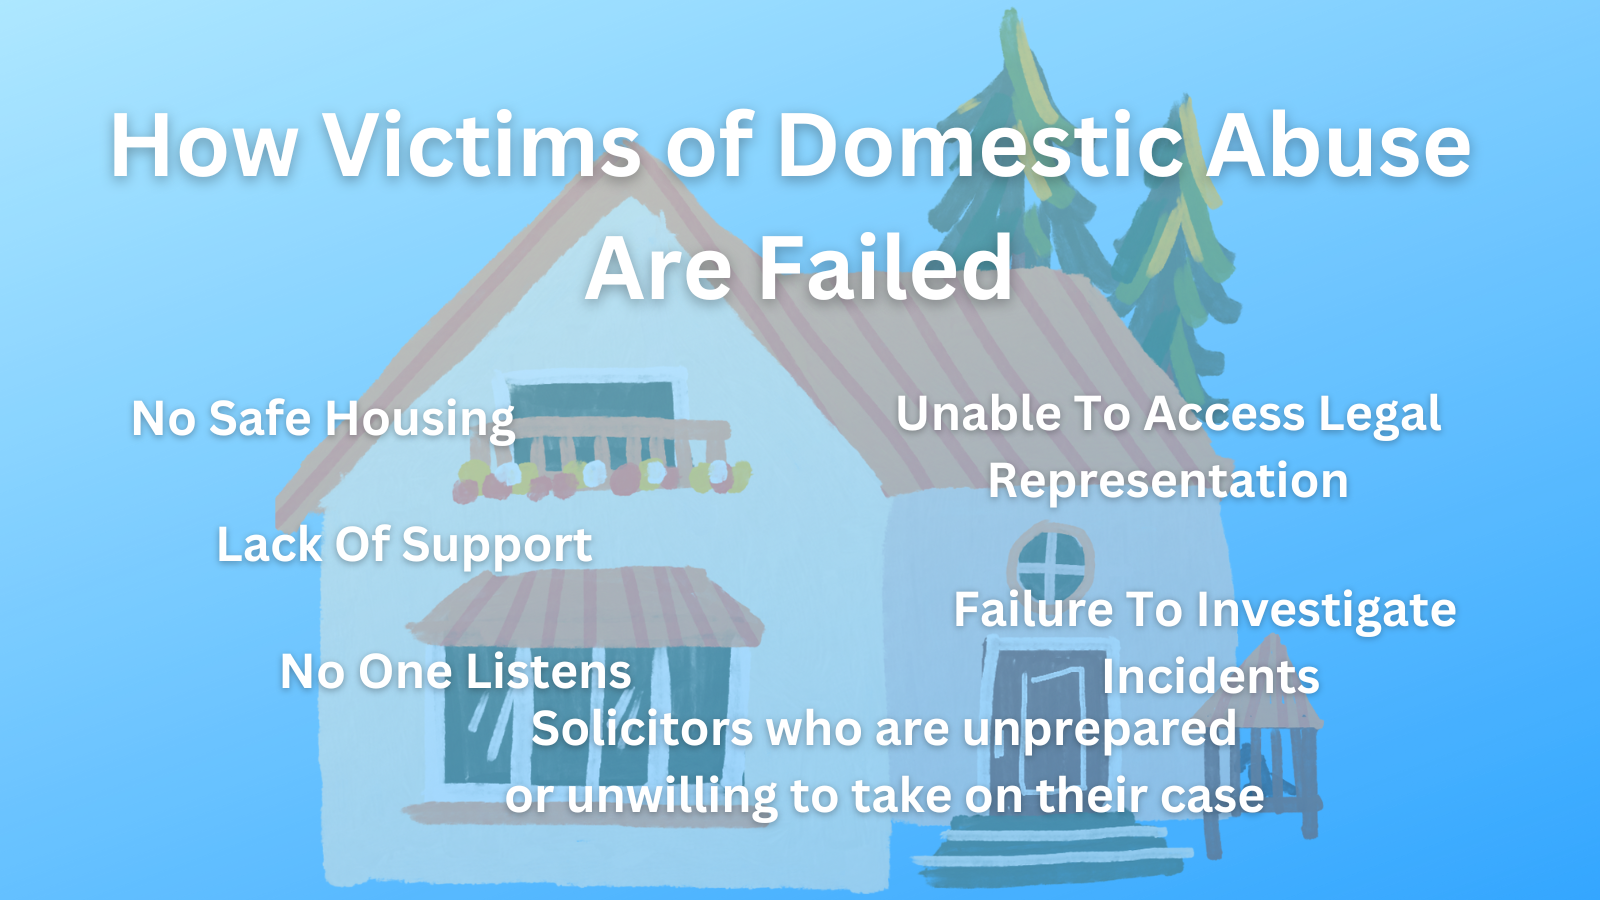 How victims of domestic abuse are failed